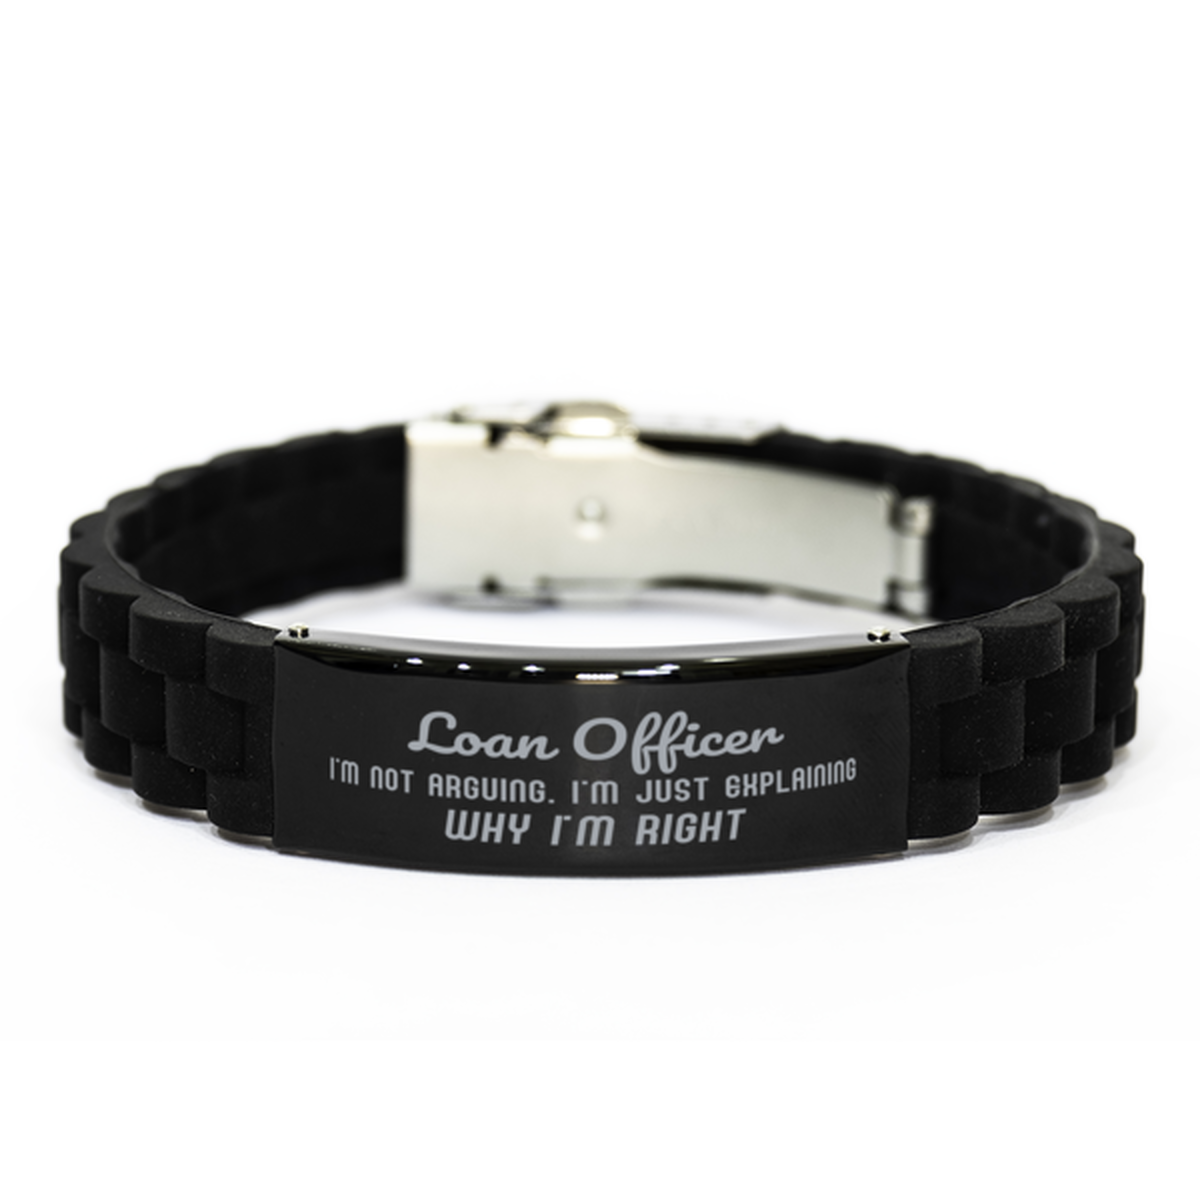 Loan Officer I'm not Arguing. I'm Just Explaining Why I'm RIGHT Black Glidelock Clasp Bracelet, Funny Saying Quote Loan Officer Gifts For Loan Officer Graduation Birthday Christmas Gifts for Men Women Coworker